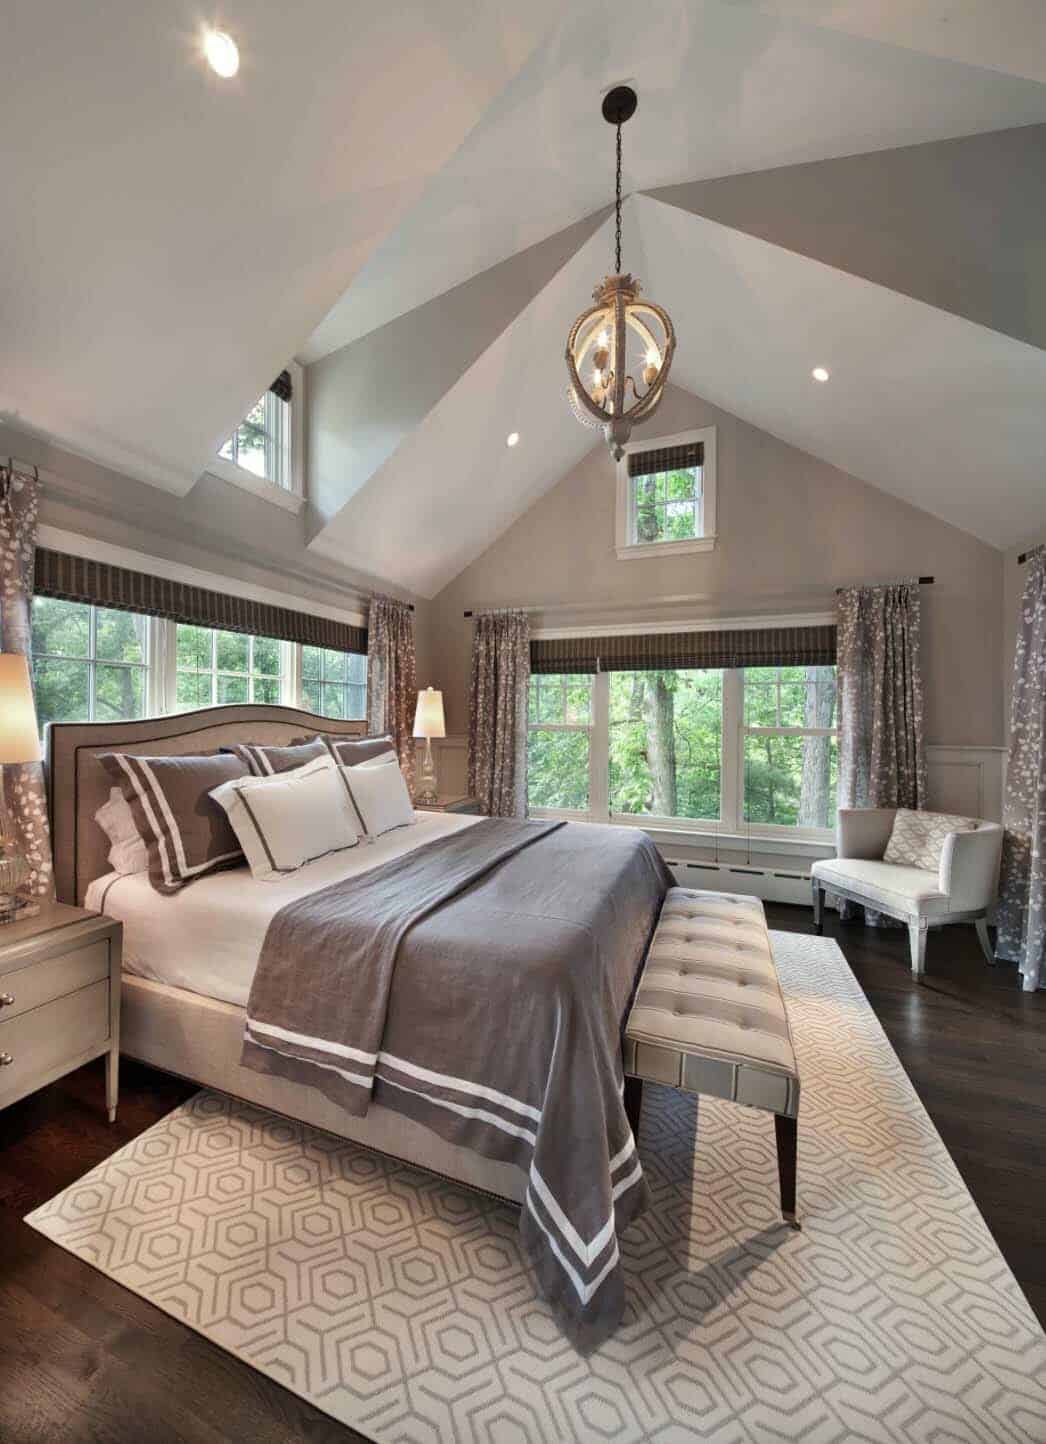 25 Absolutely Stunning Master Bedroom, Master Bedroom And Bathroom Color Schemes